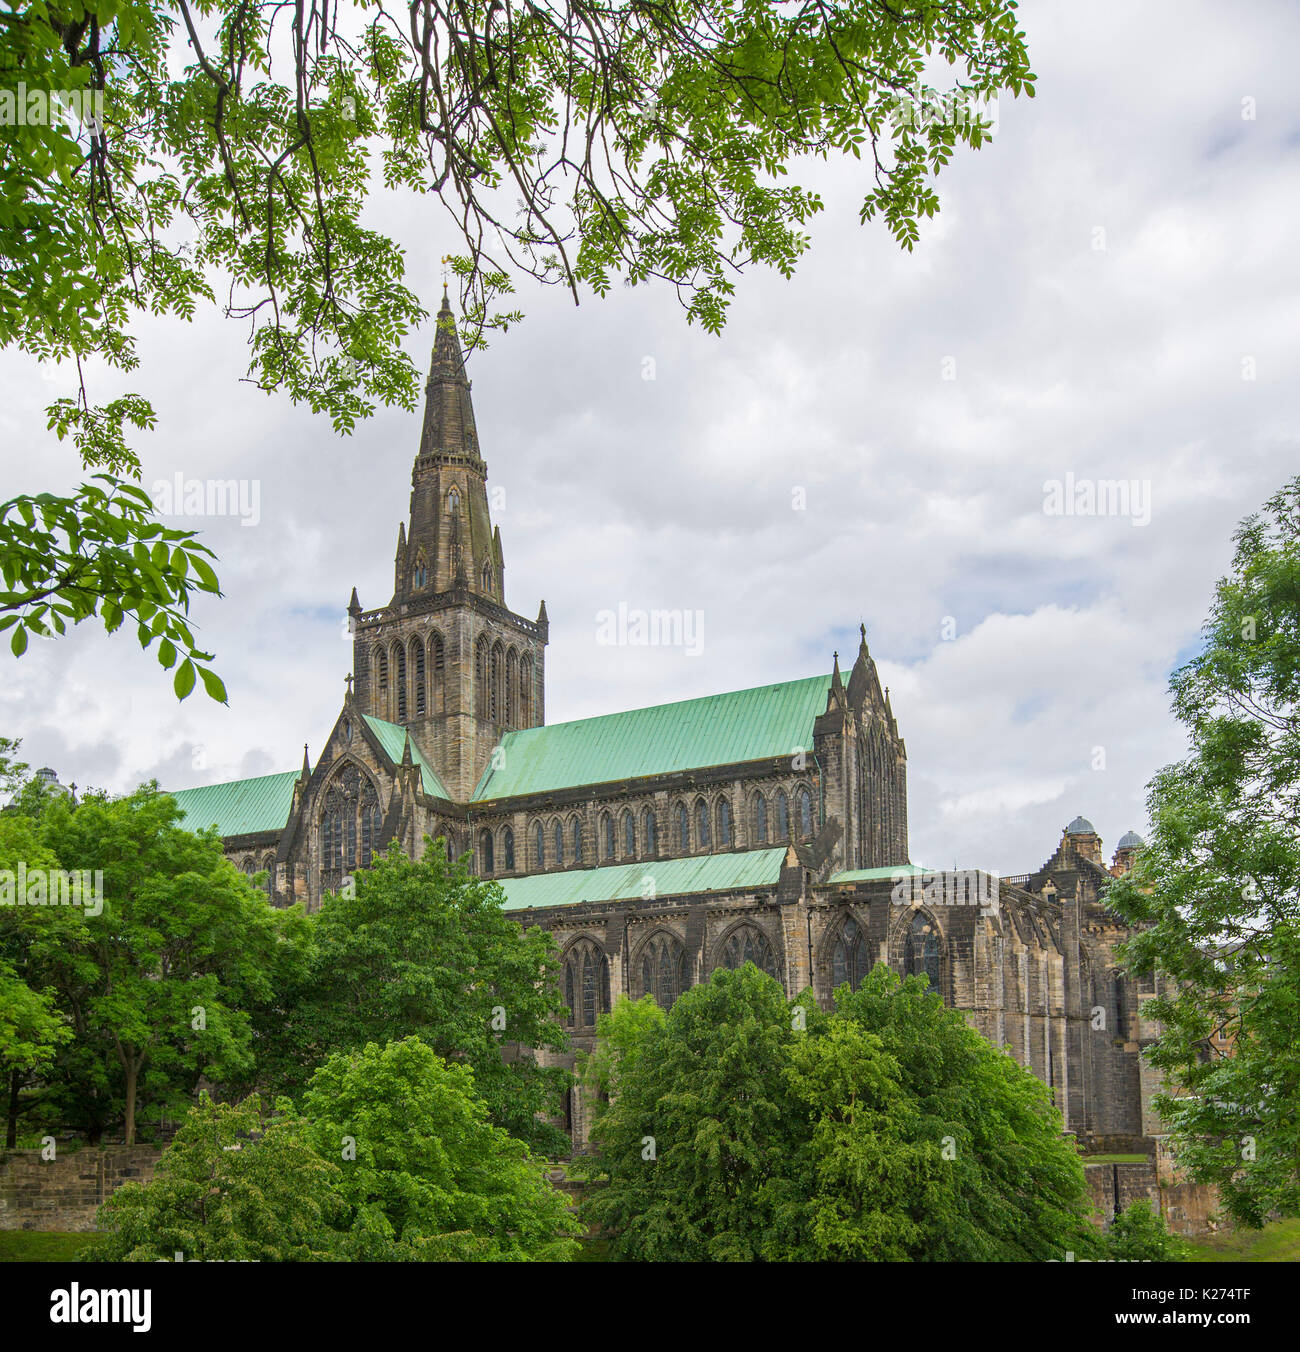 Historic Glasgow cathedral with light green roof and framed by foliage of trees, viewed from nearby Necropolis, in Scotland Stock Photo